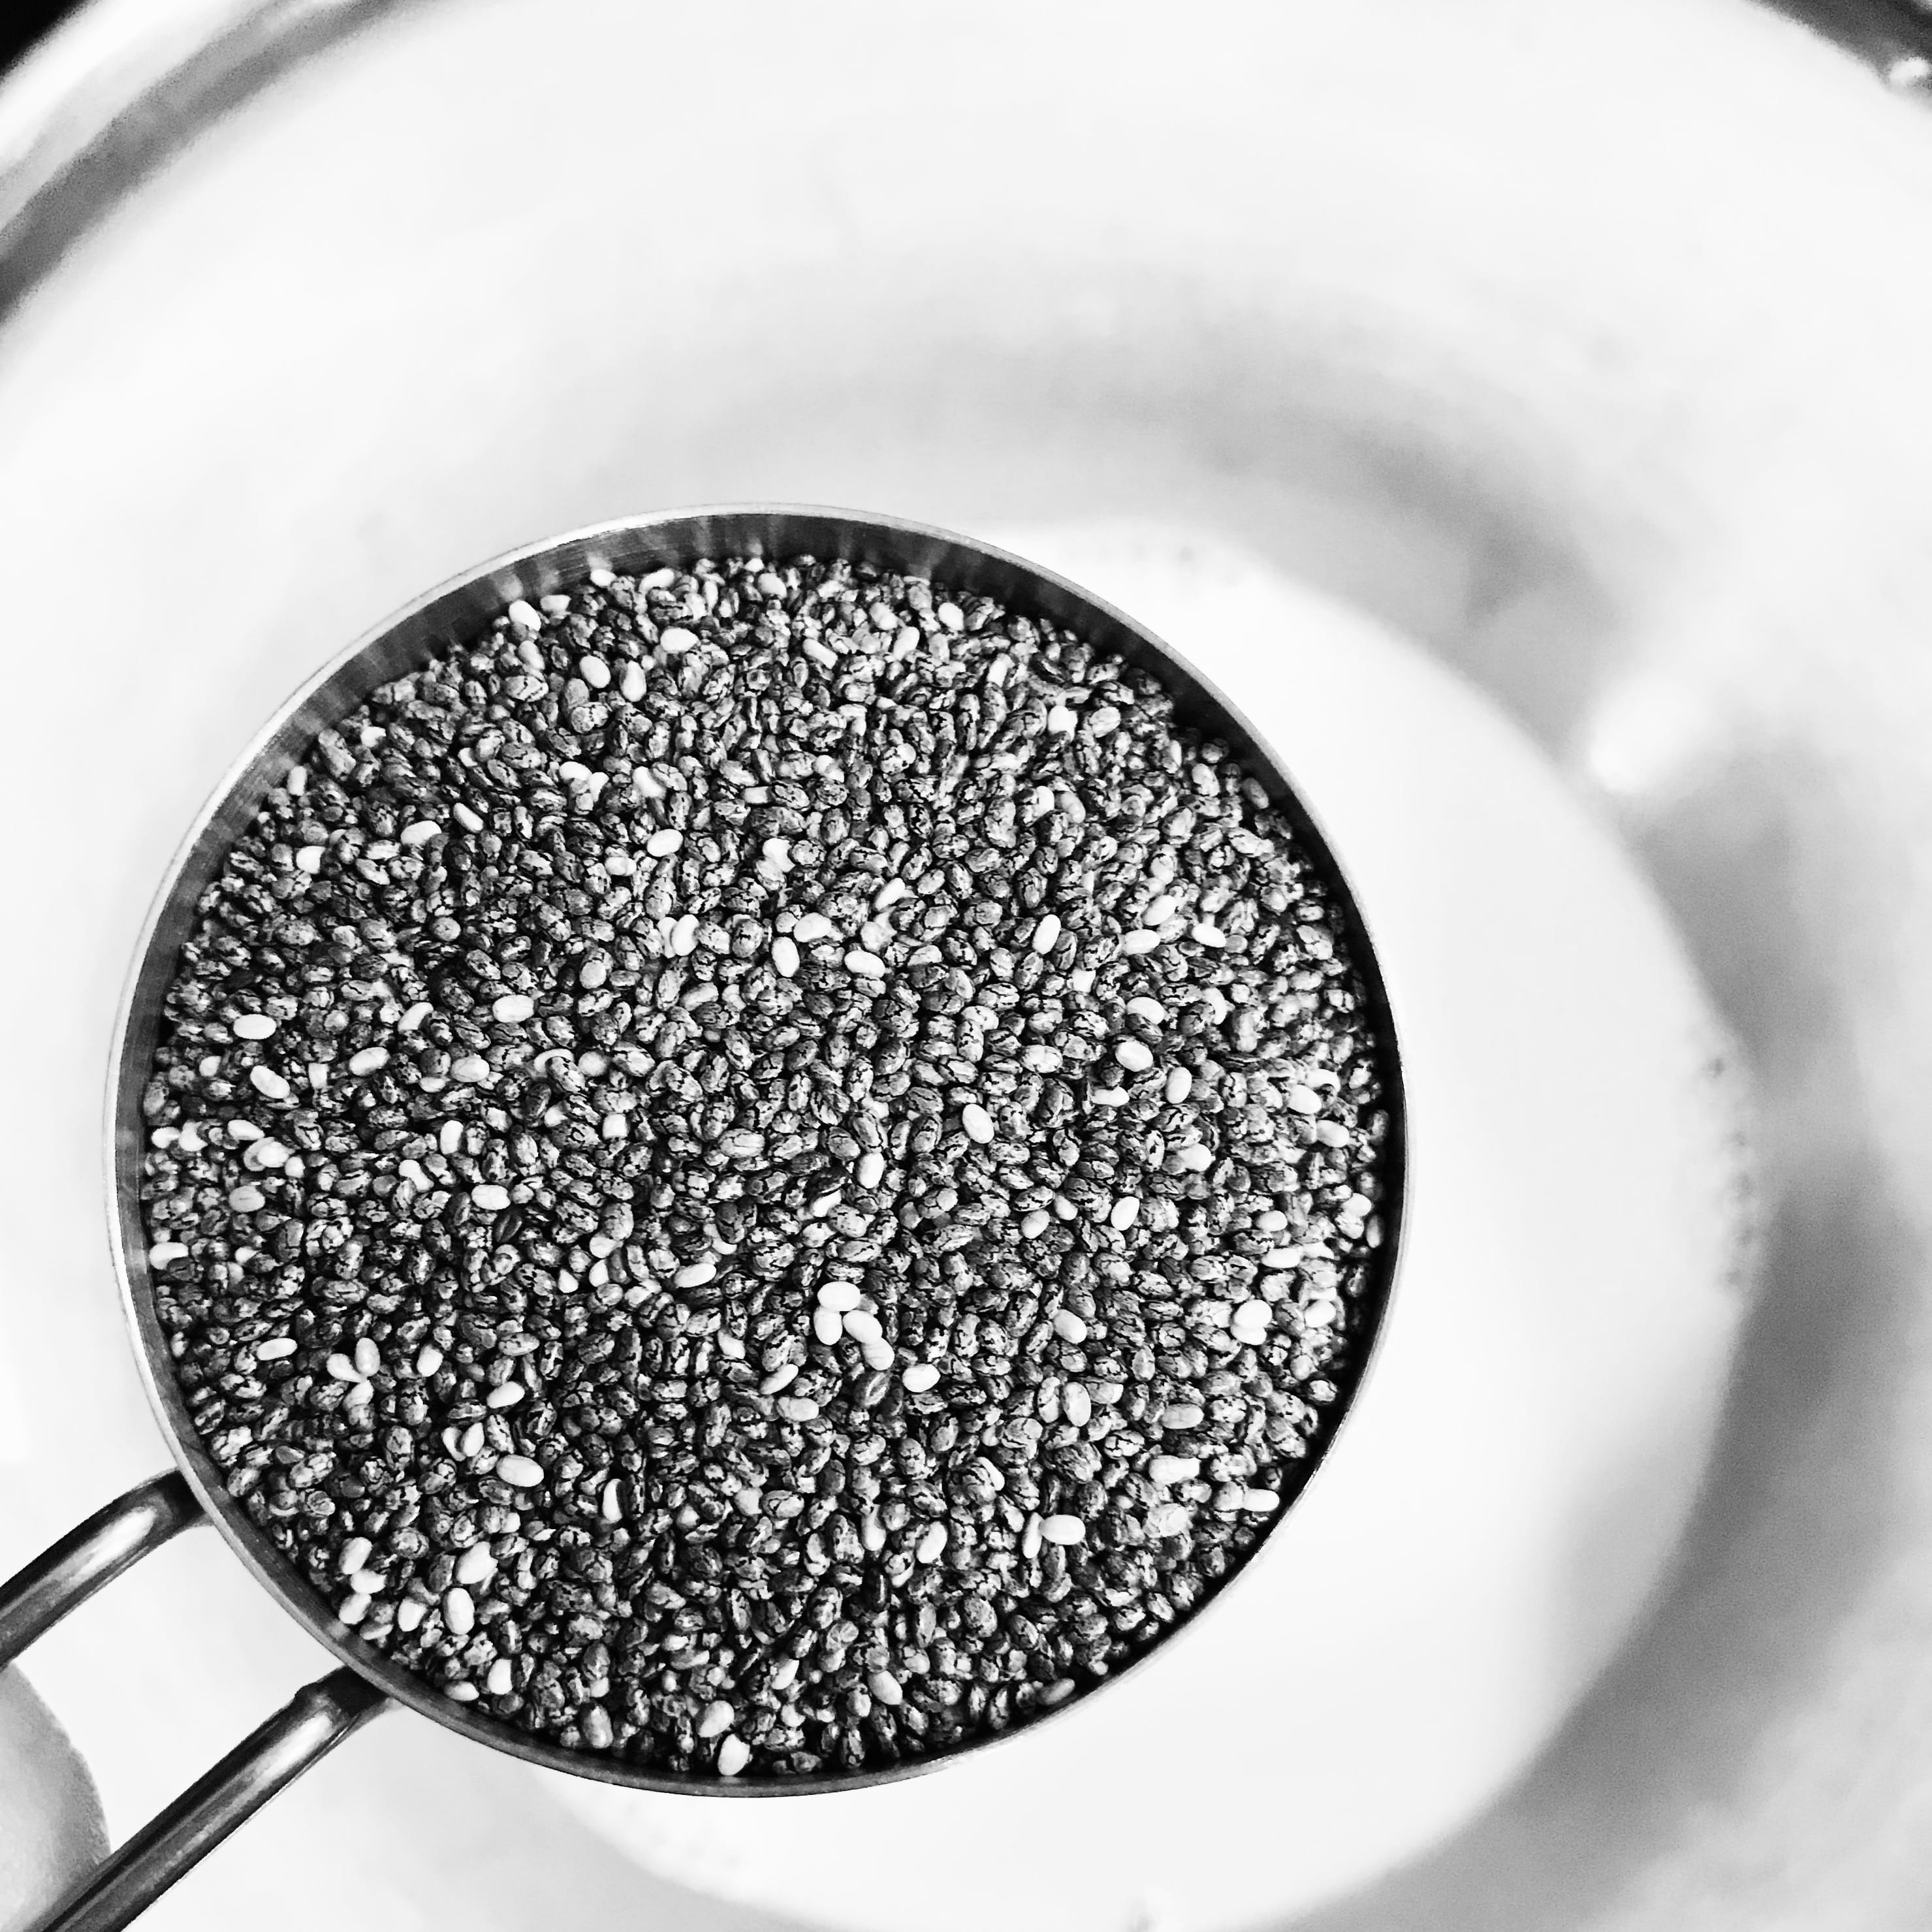 Grayscale Photography of Grains on Cook Pot, container, cooking pot